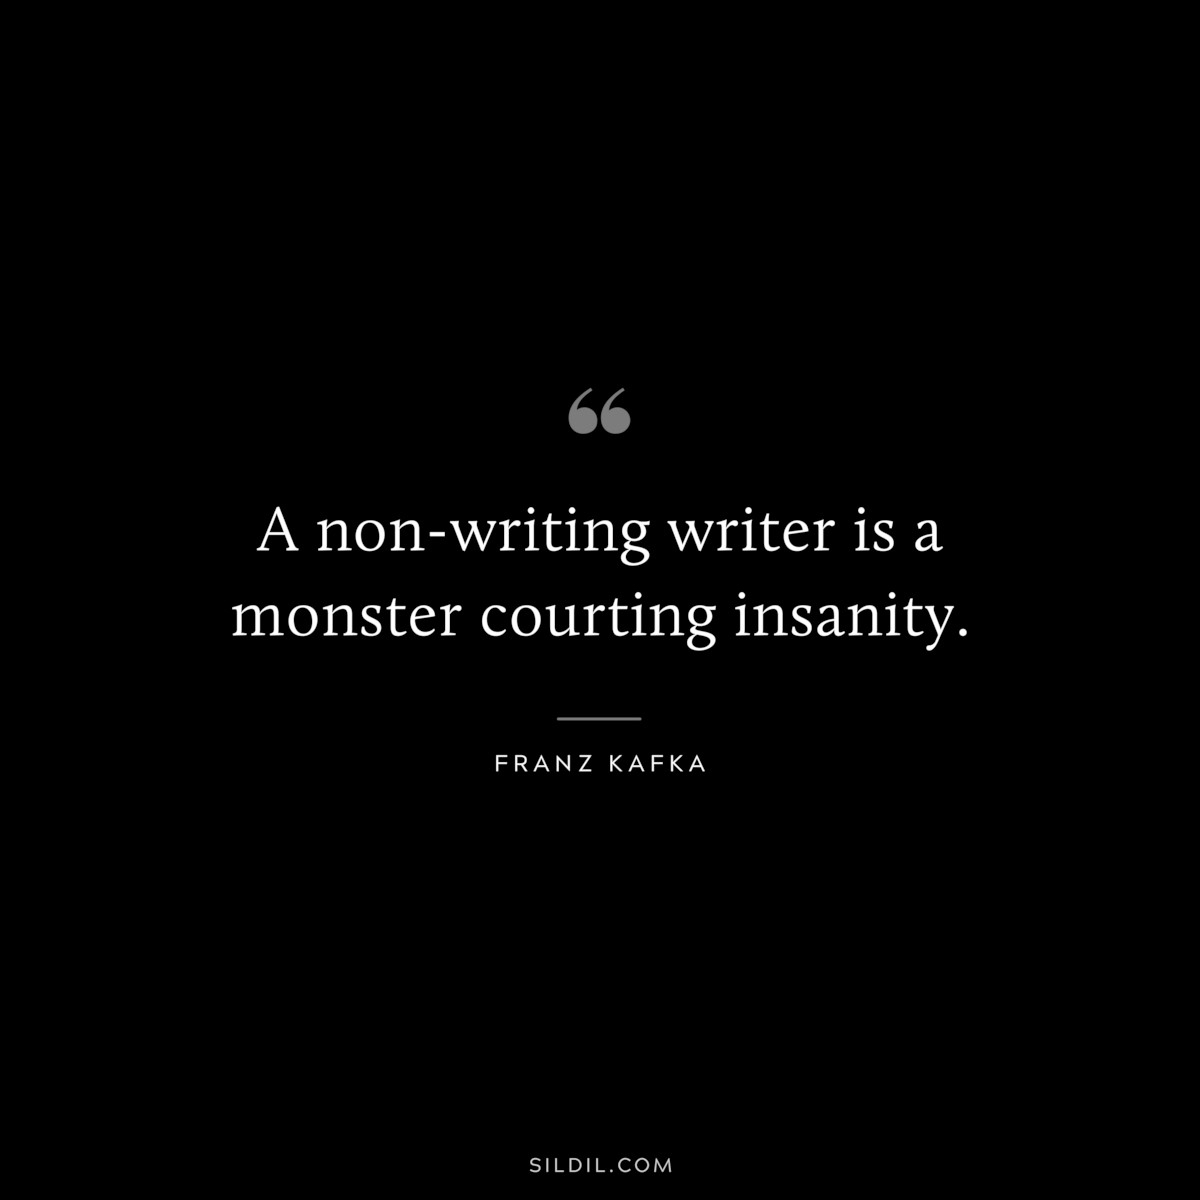 A non-writing writer is a monster courting insanity. ― Franz Kafka